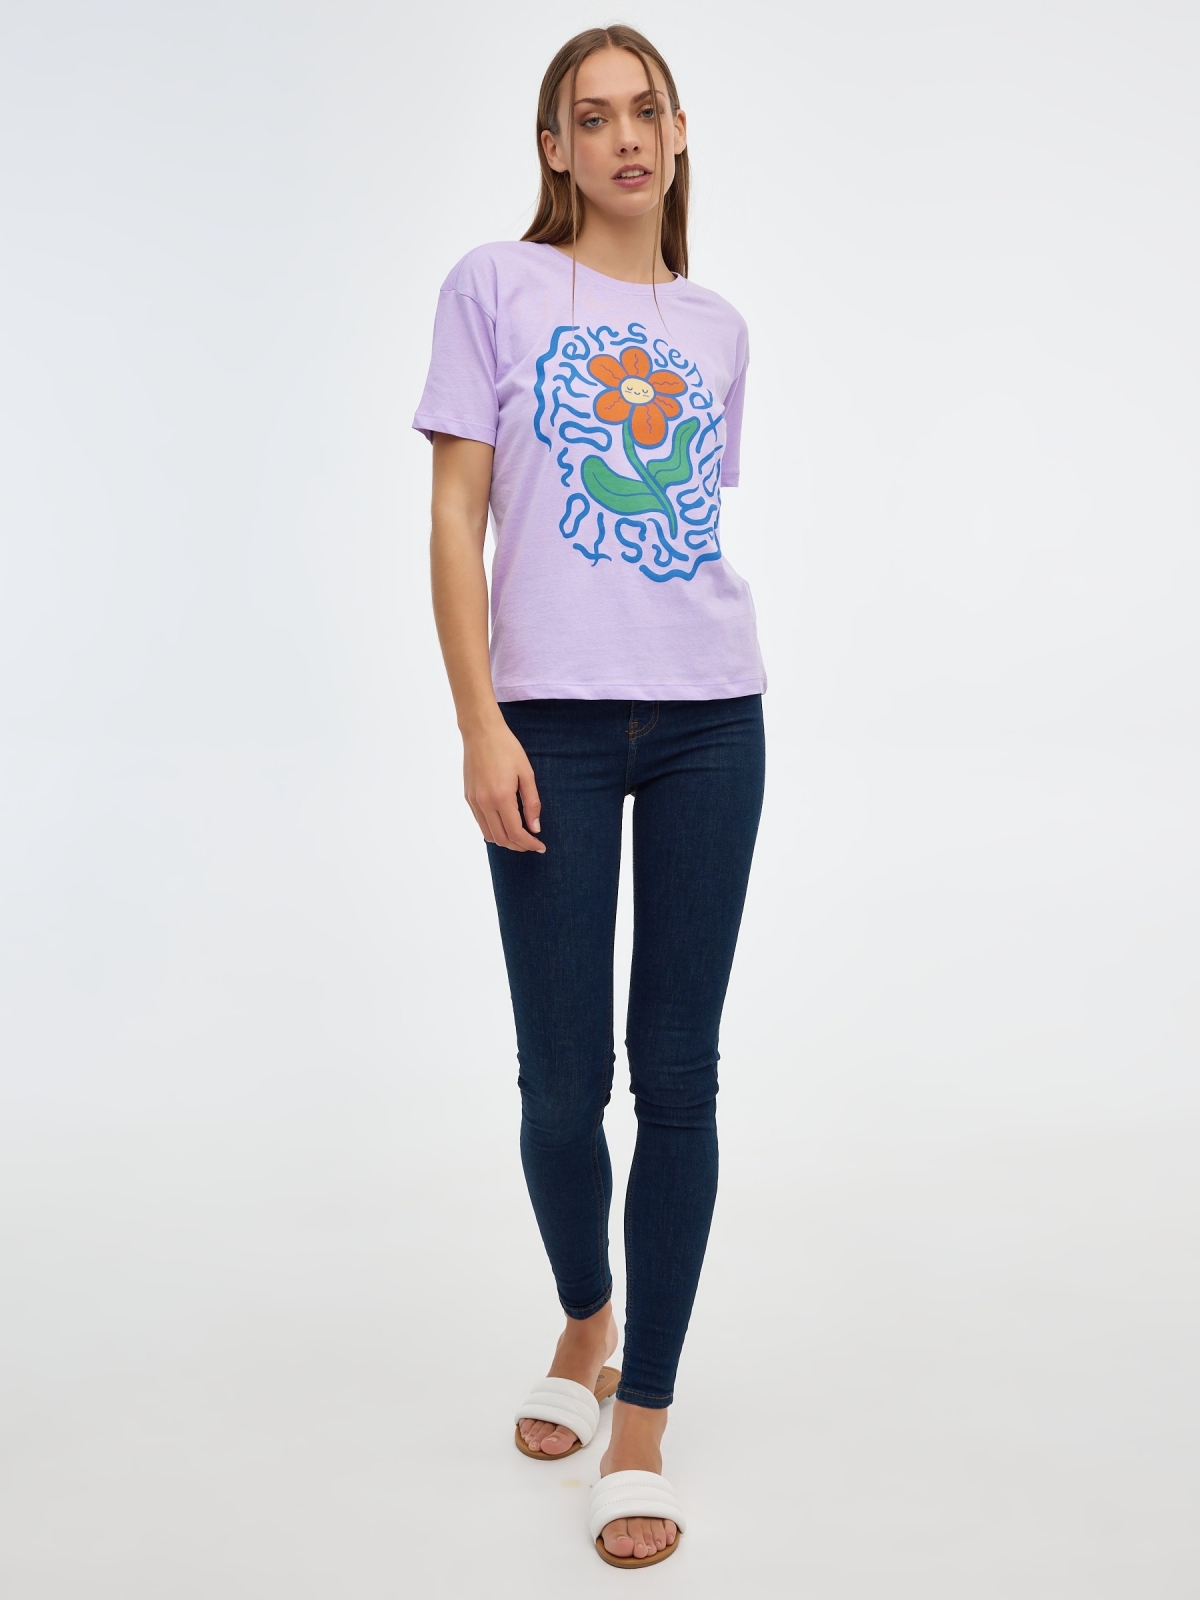 Flower print t-shirt lilac front view